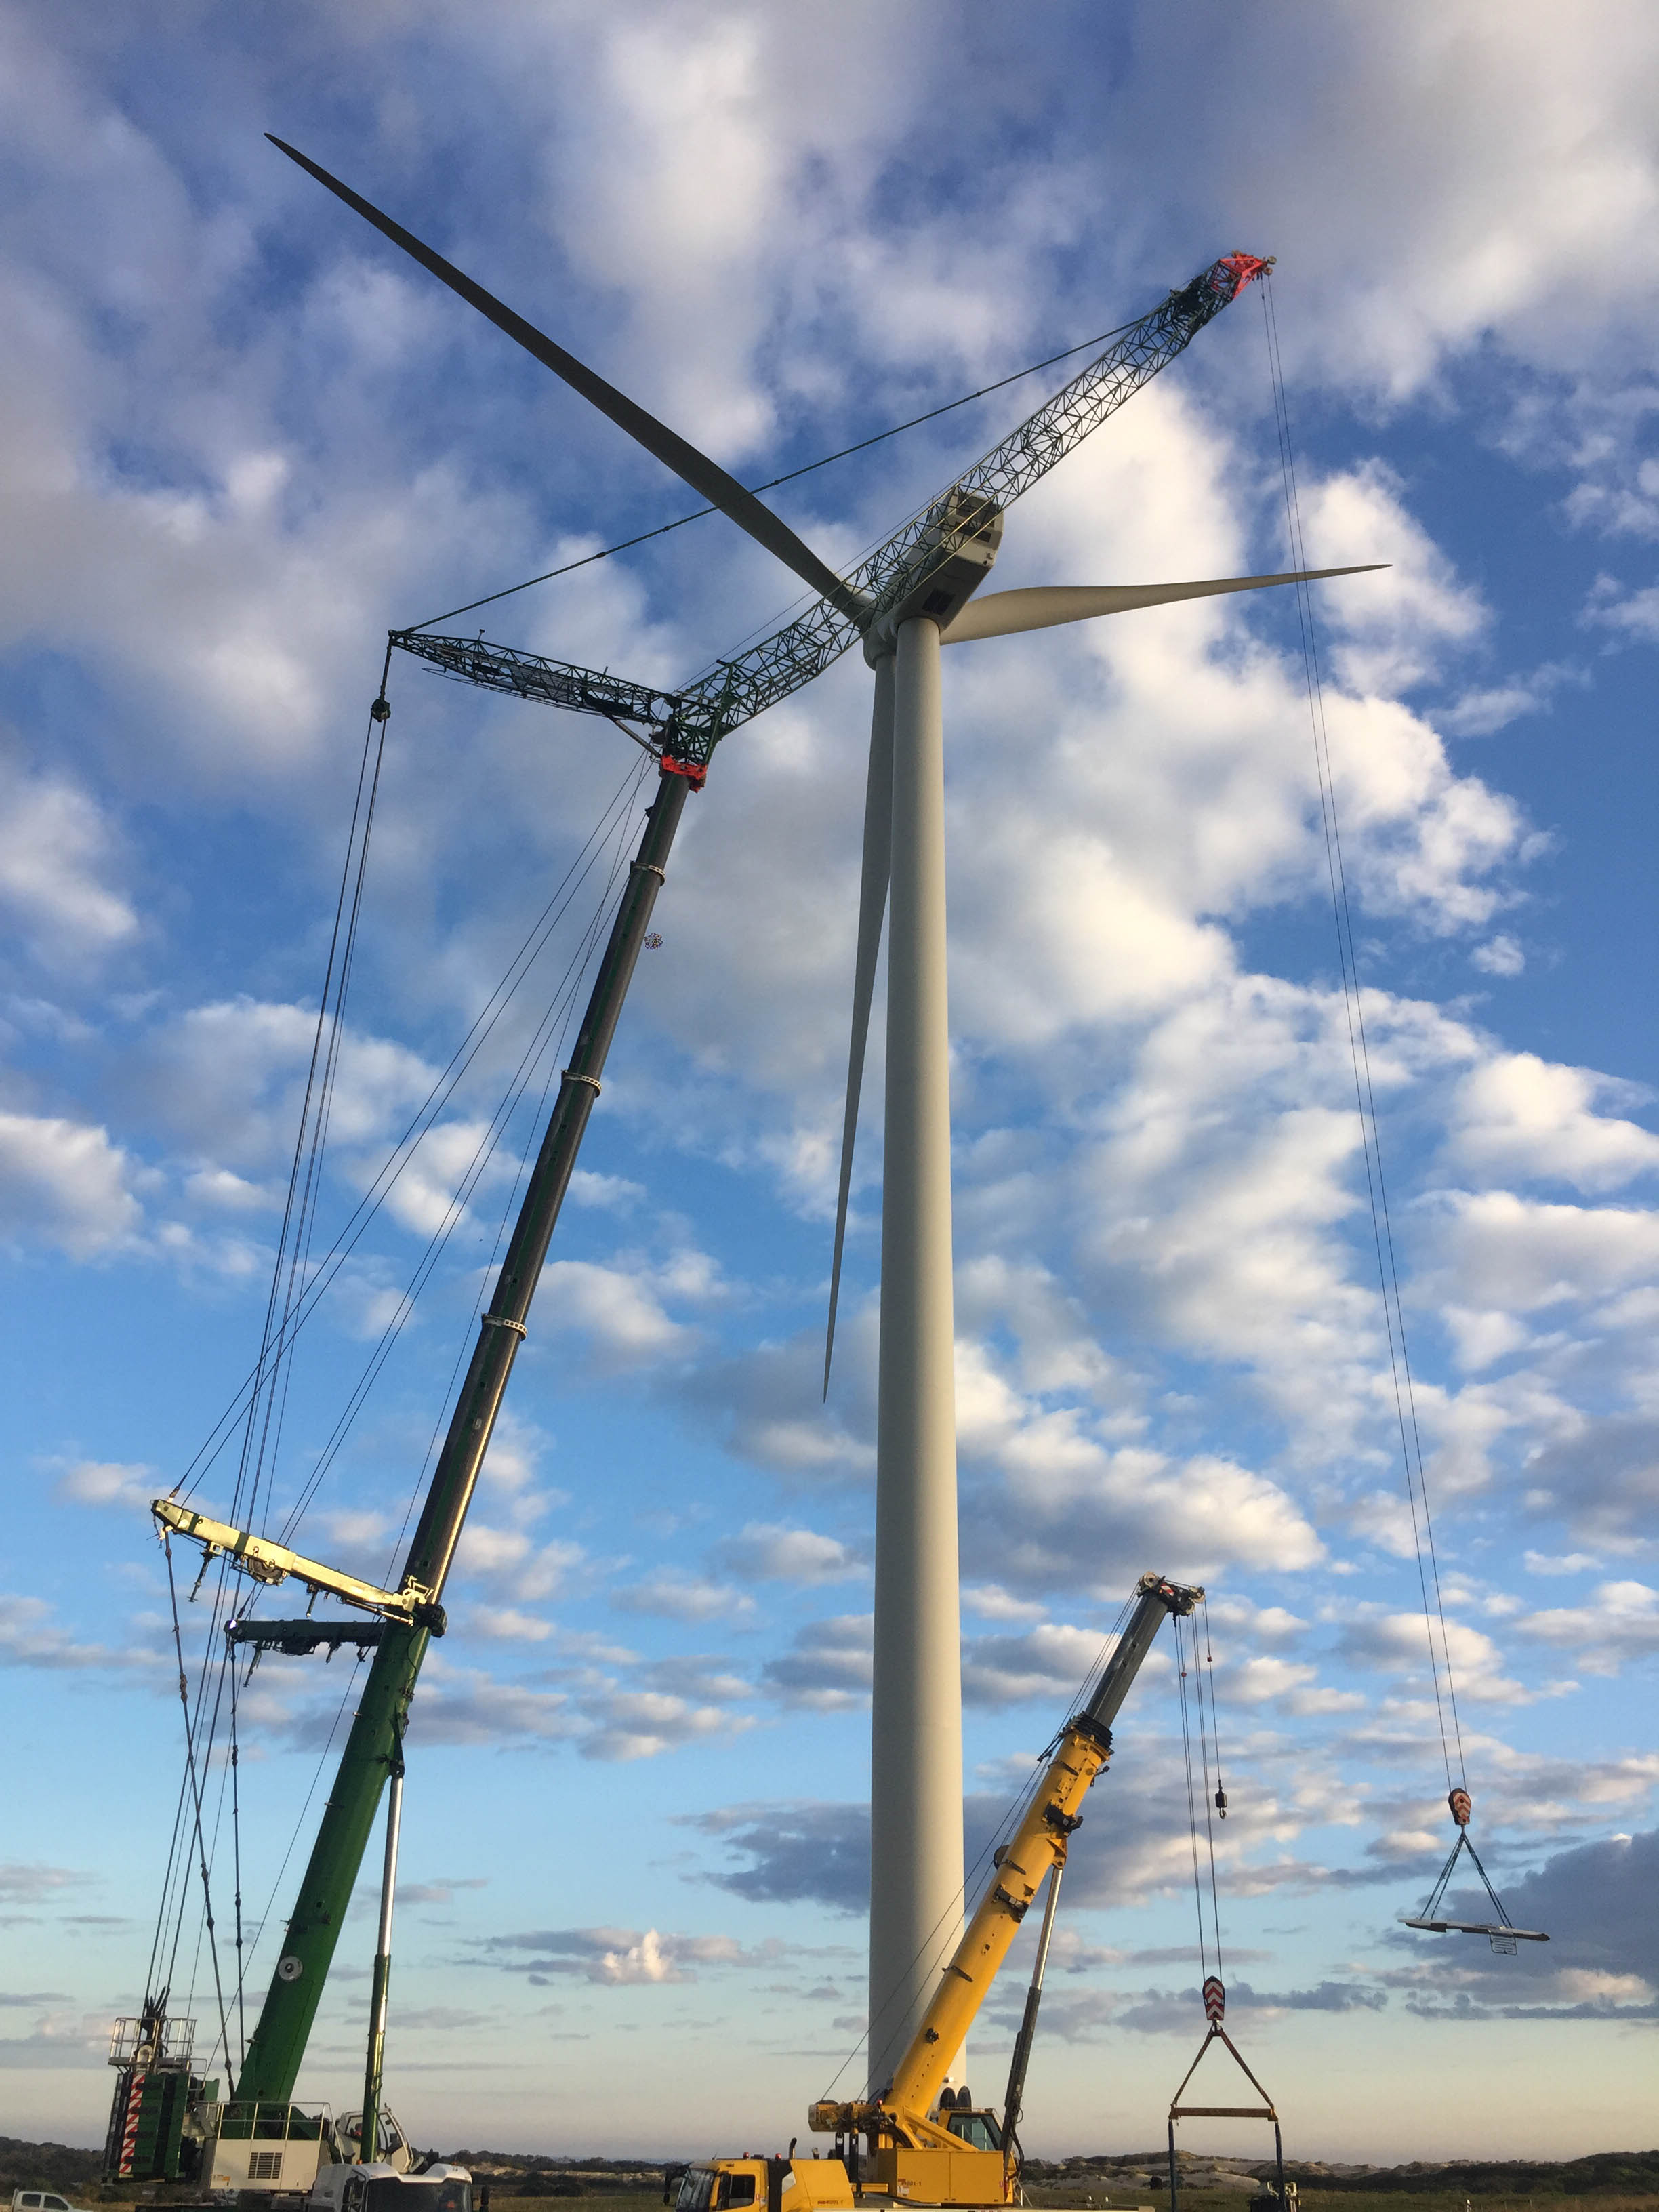 When a wind turbine at the Musselroe Wind Farm in Tasmania, Australia required a change of gearbox and generator, a Grove GMK6400 all-terrain crane turned out to be the perfect choice for the job. Woolnorth Wind Farms, owner and operator of the Musselroe location, contracted turbine manufacturer Vestas Wind Technology to manage the replacement work.